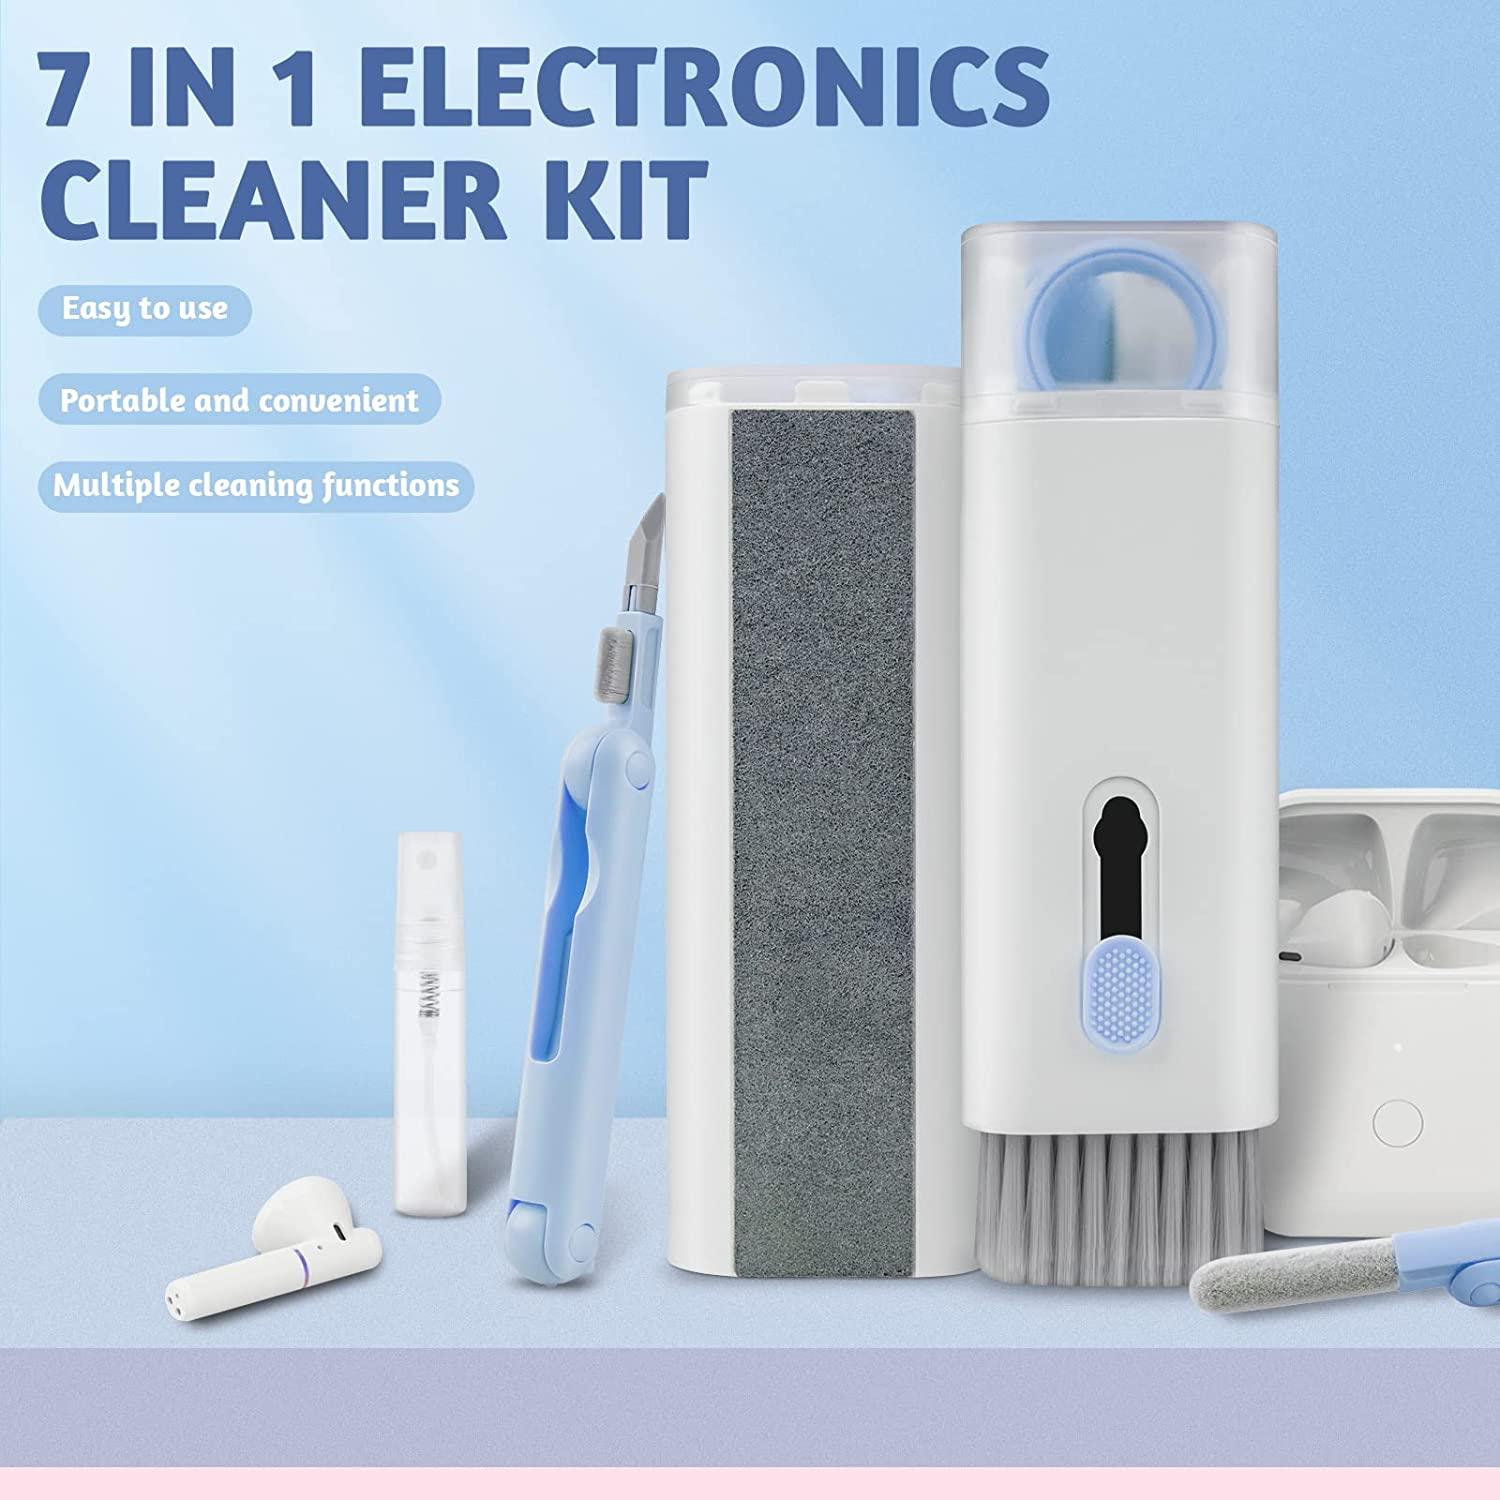  5-in-1 Electronic Cleaner kit- Portable Cleaning kit for  Airpods/Earbuds/Phone/Camera/Watch/Laptop,with Cleaning Pen and Spray  Bottle,Multifunctional Cleaning Tool : Electronics